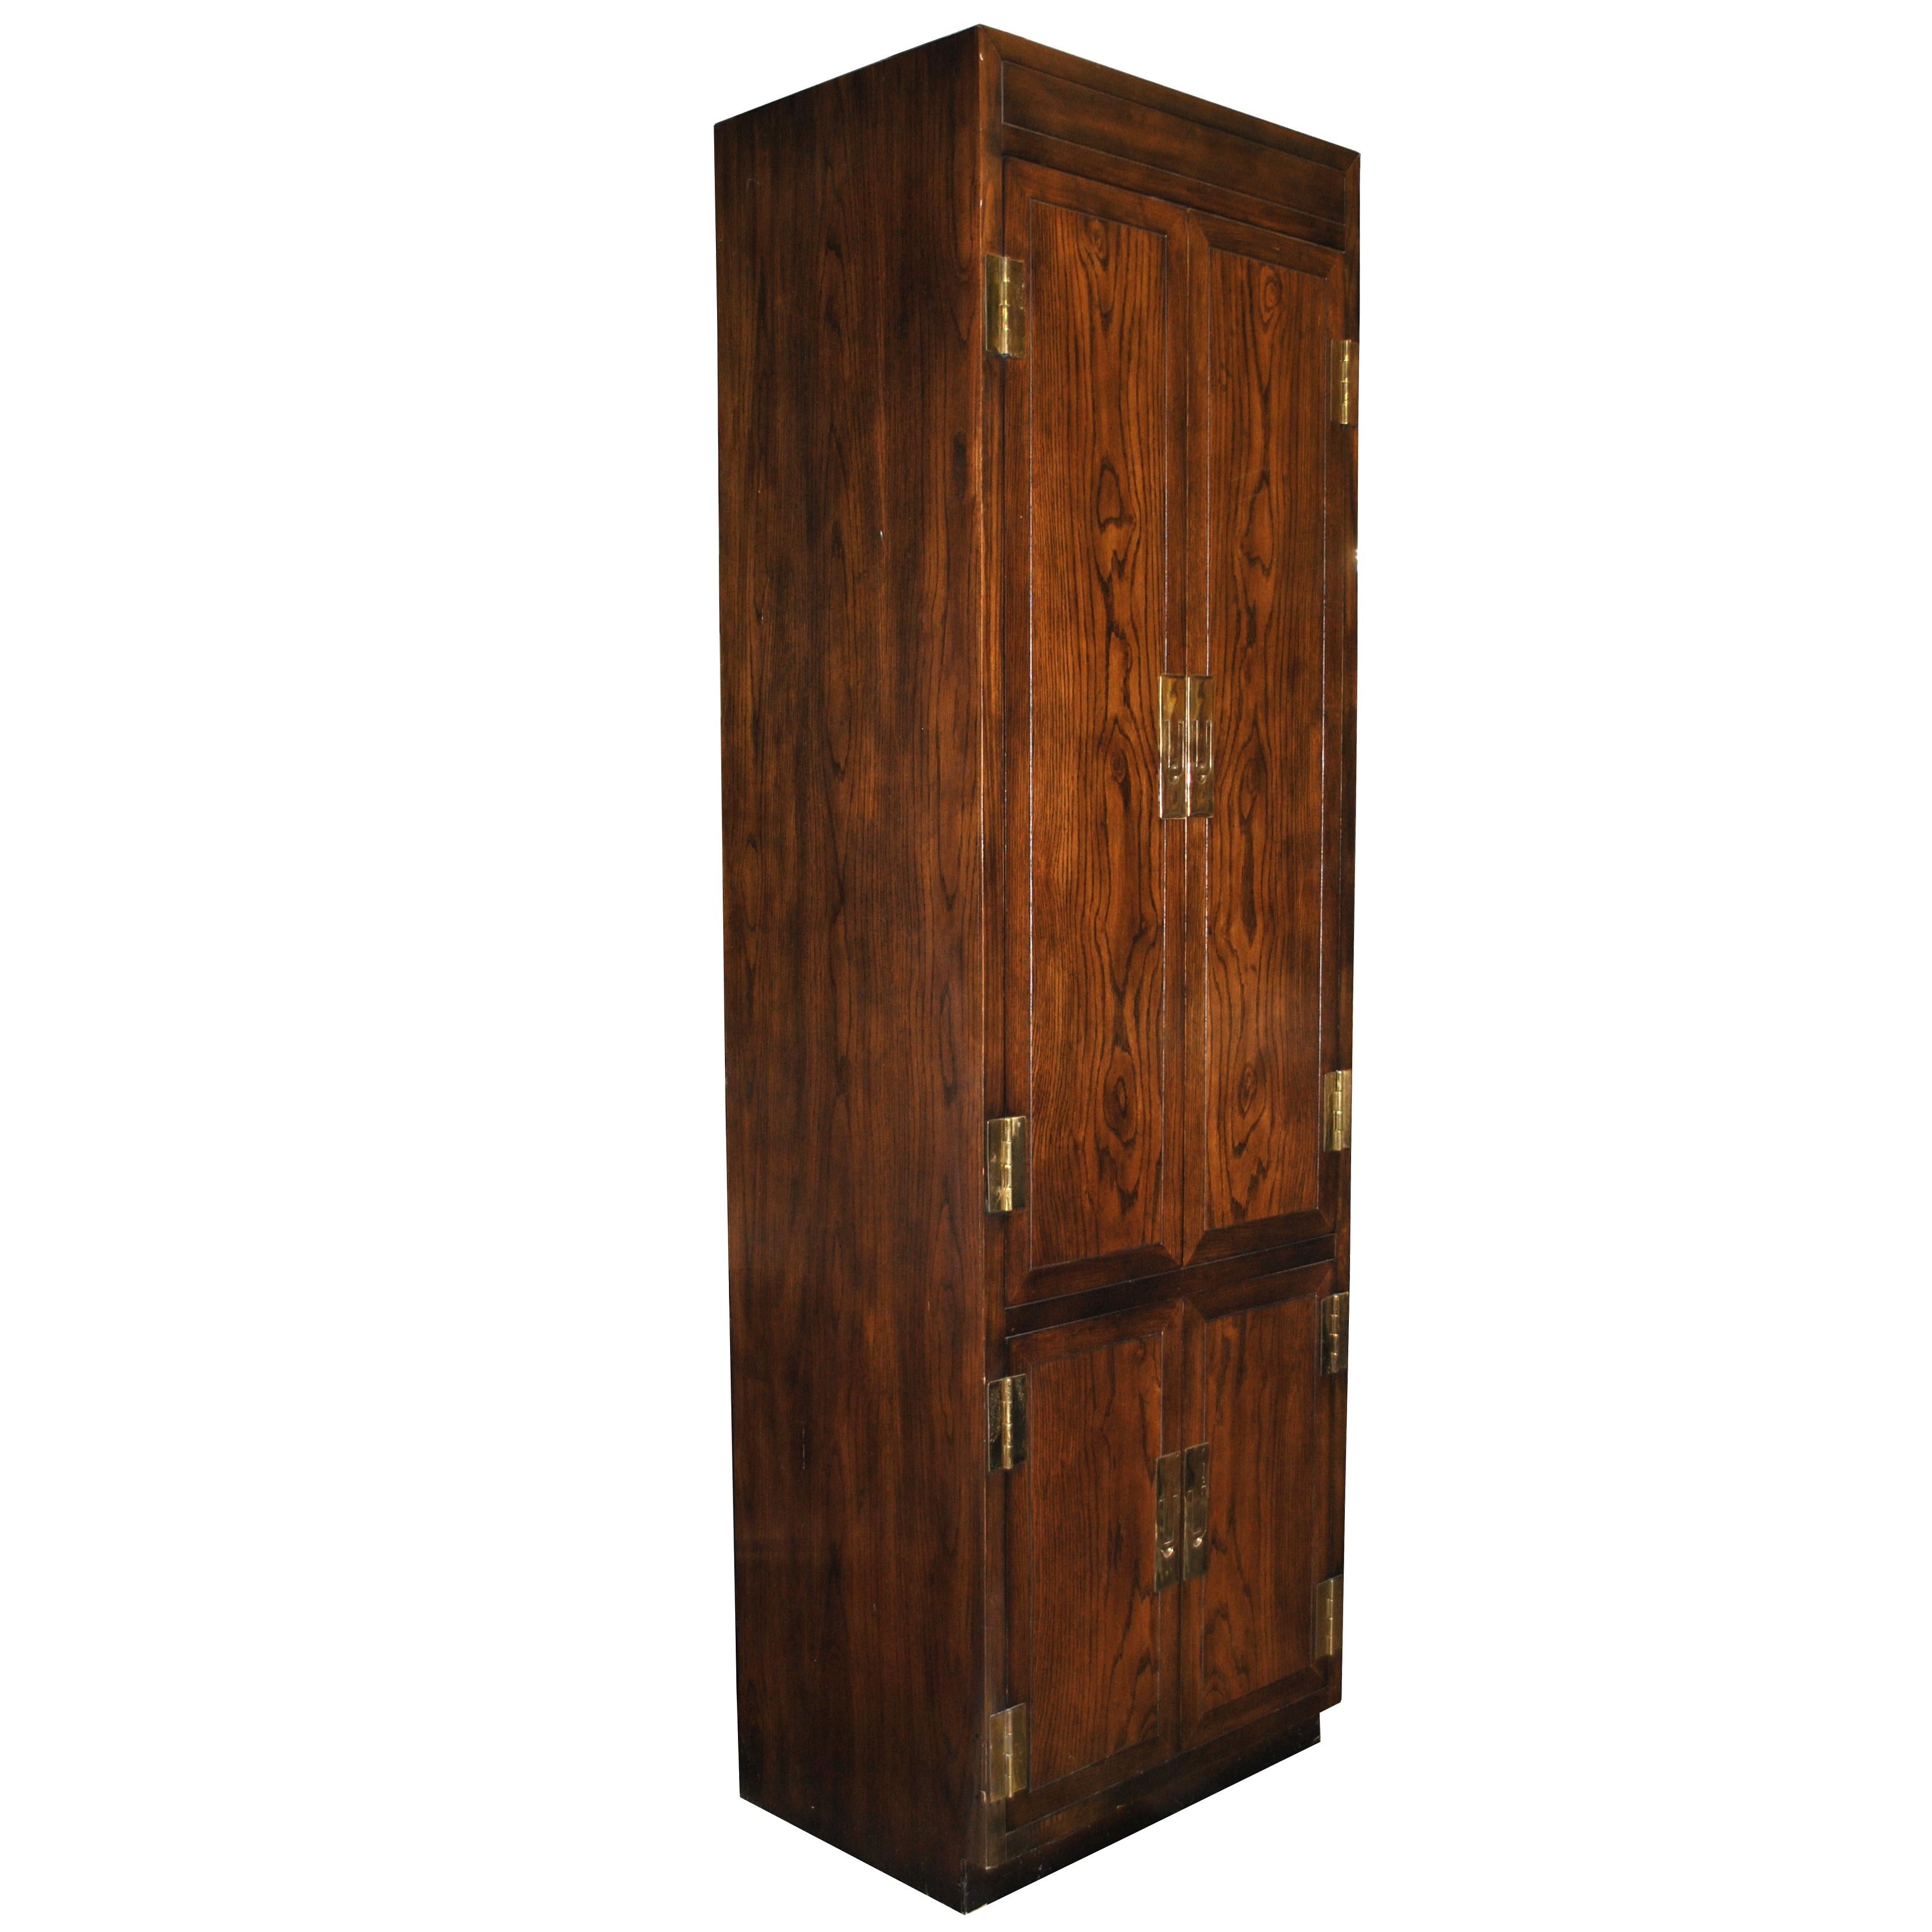 Campaign style armoire by Henredon from the Scene One collection

Dark walnut with brass hinges and latch pulls.

Dovetailed drawers and shelves. Manufacturer's mark.

    